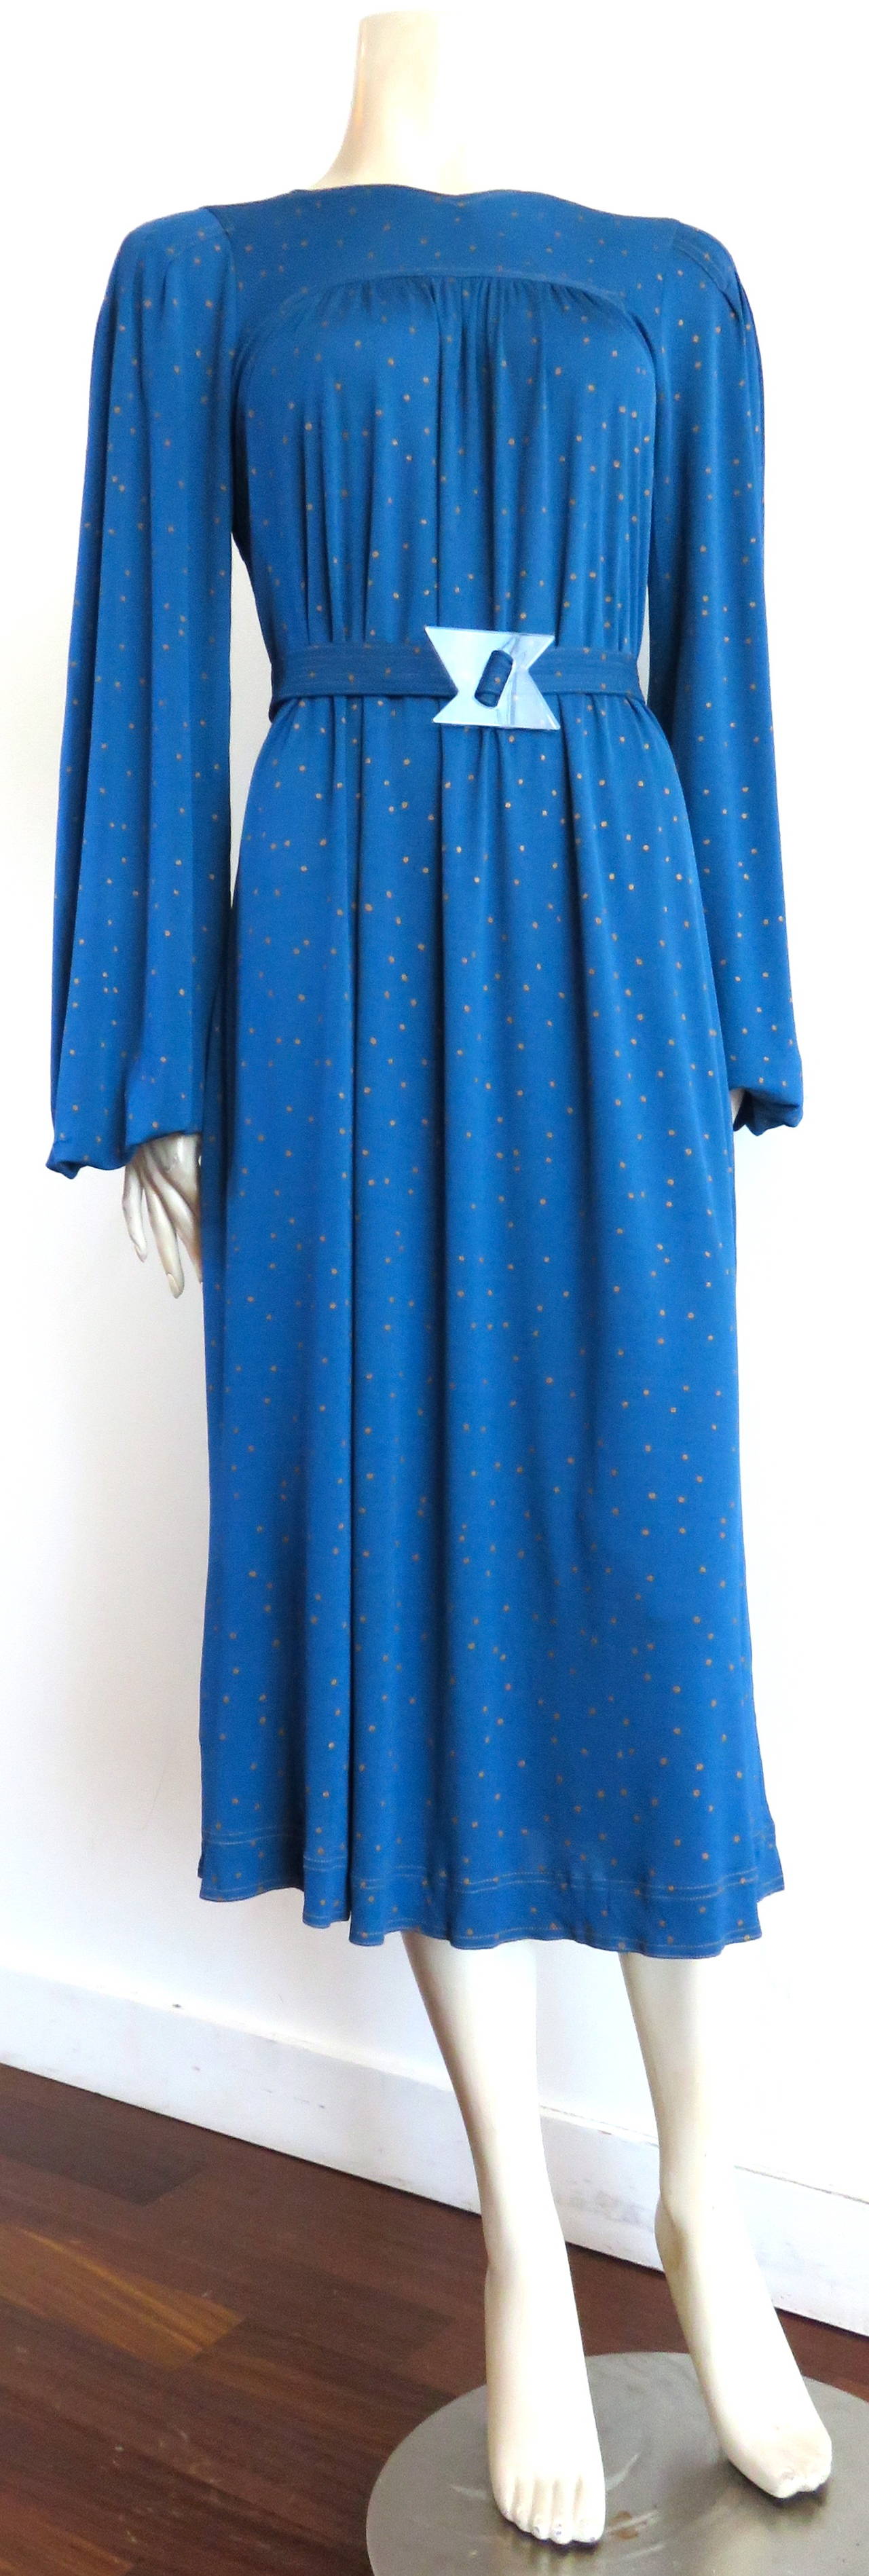 1970's JEAN MUIR Belted dress with major, living, fashion designer provenance (provided upon request)

This lovely dress is made of a gorgeous, cerulean blue, viscose, matte-jersey with golden dot overprint. 

The dress features an adjustable,